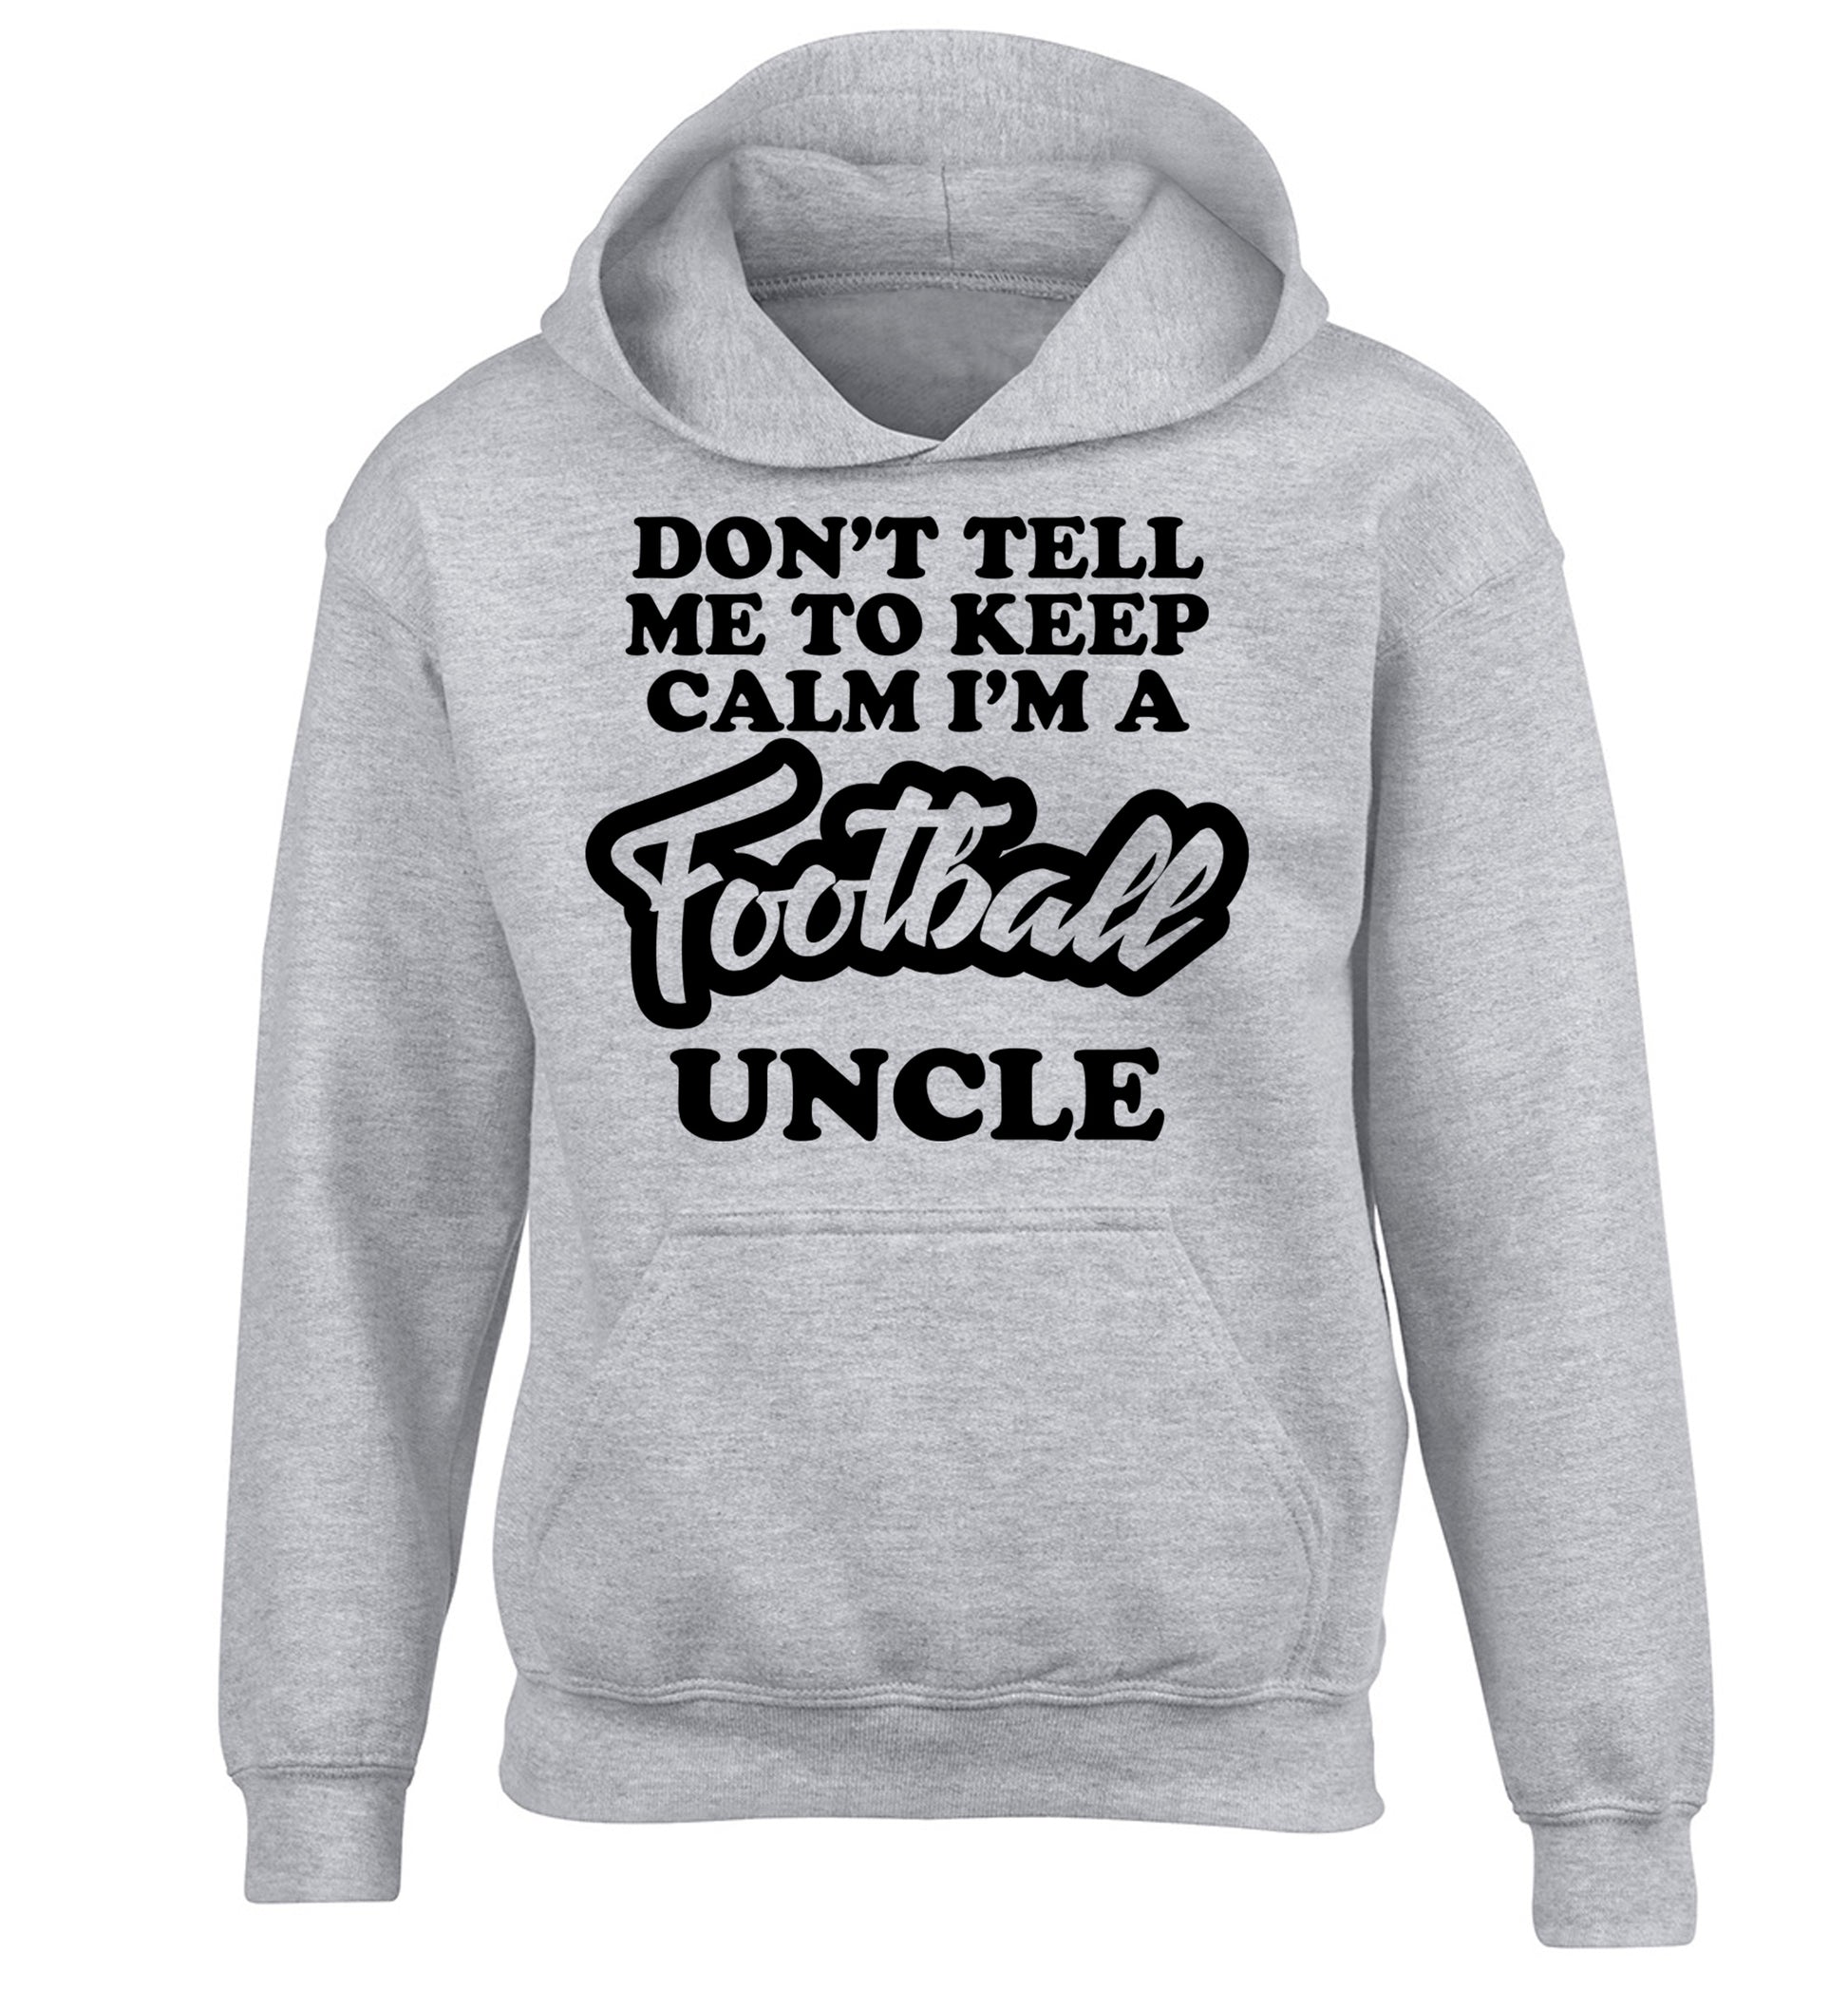 Worlds most amazing football uncle children's grey hoodie 12-14 Years